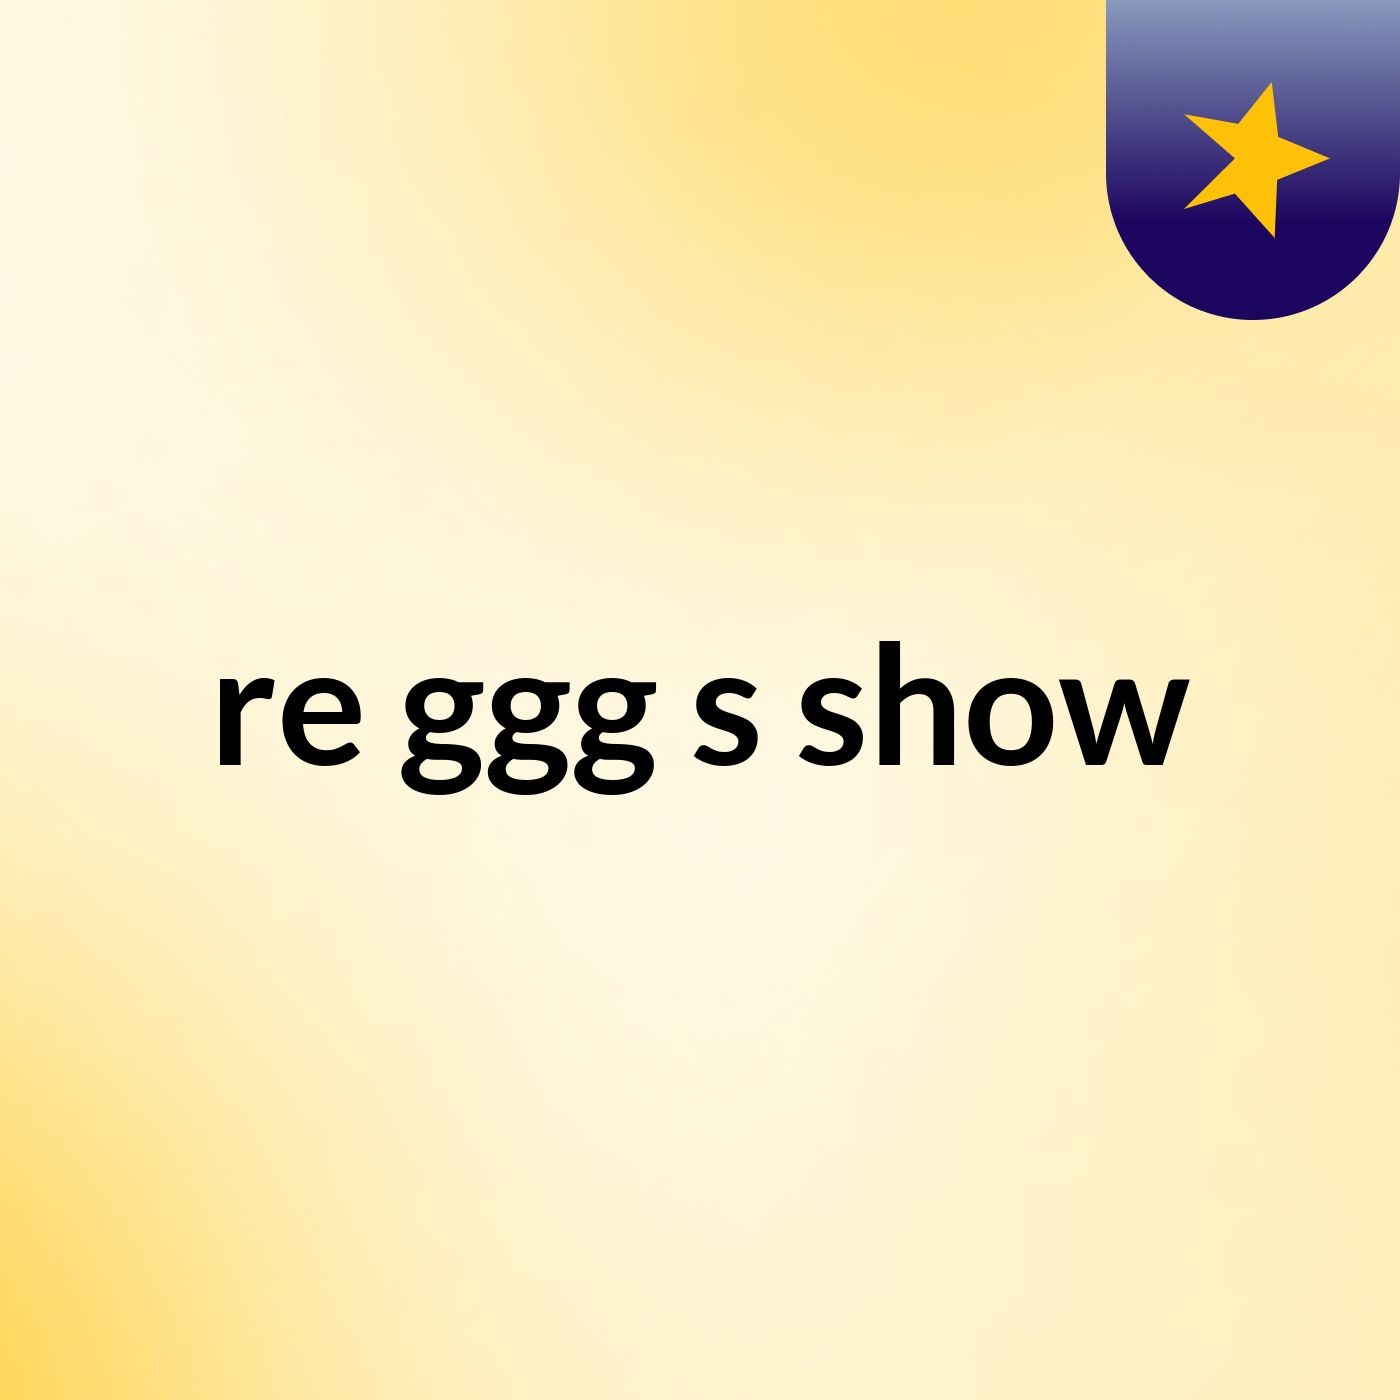 re ggg's show